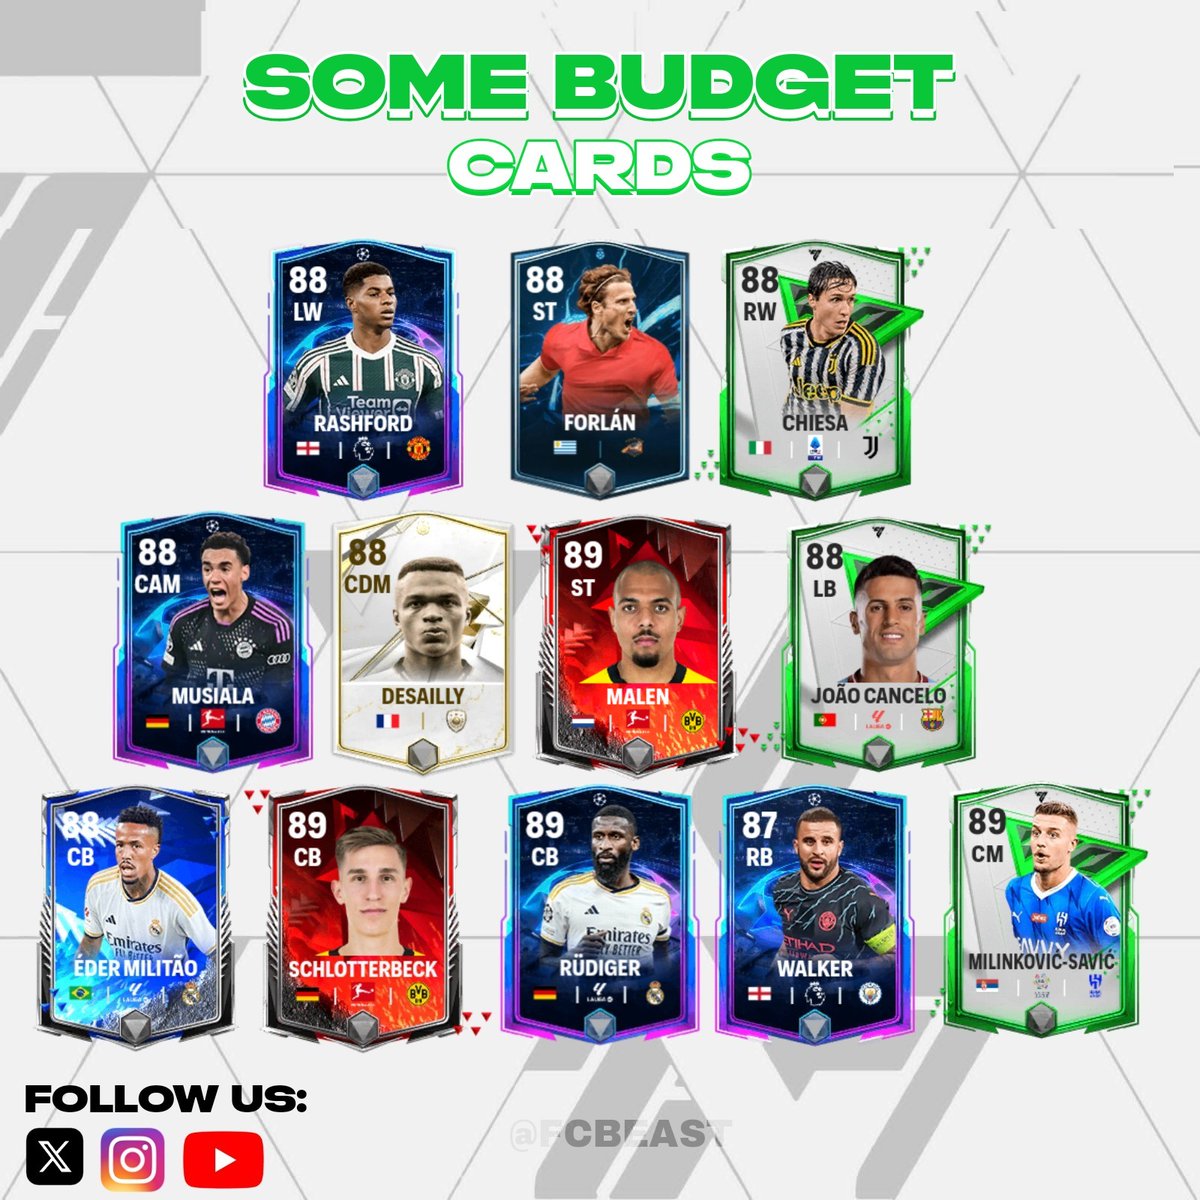 BEST BUDGET CARDS Likes & Retweets Appreciated #EAFC24 #eafcmobile